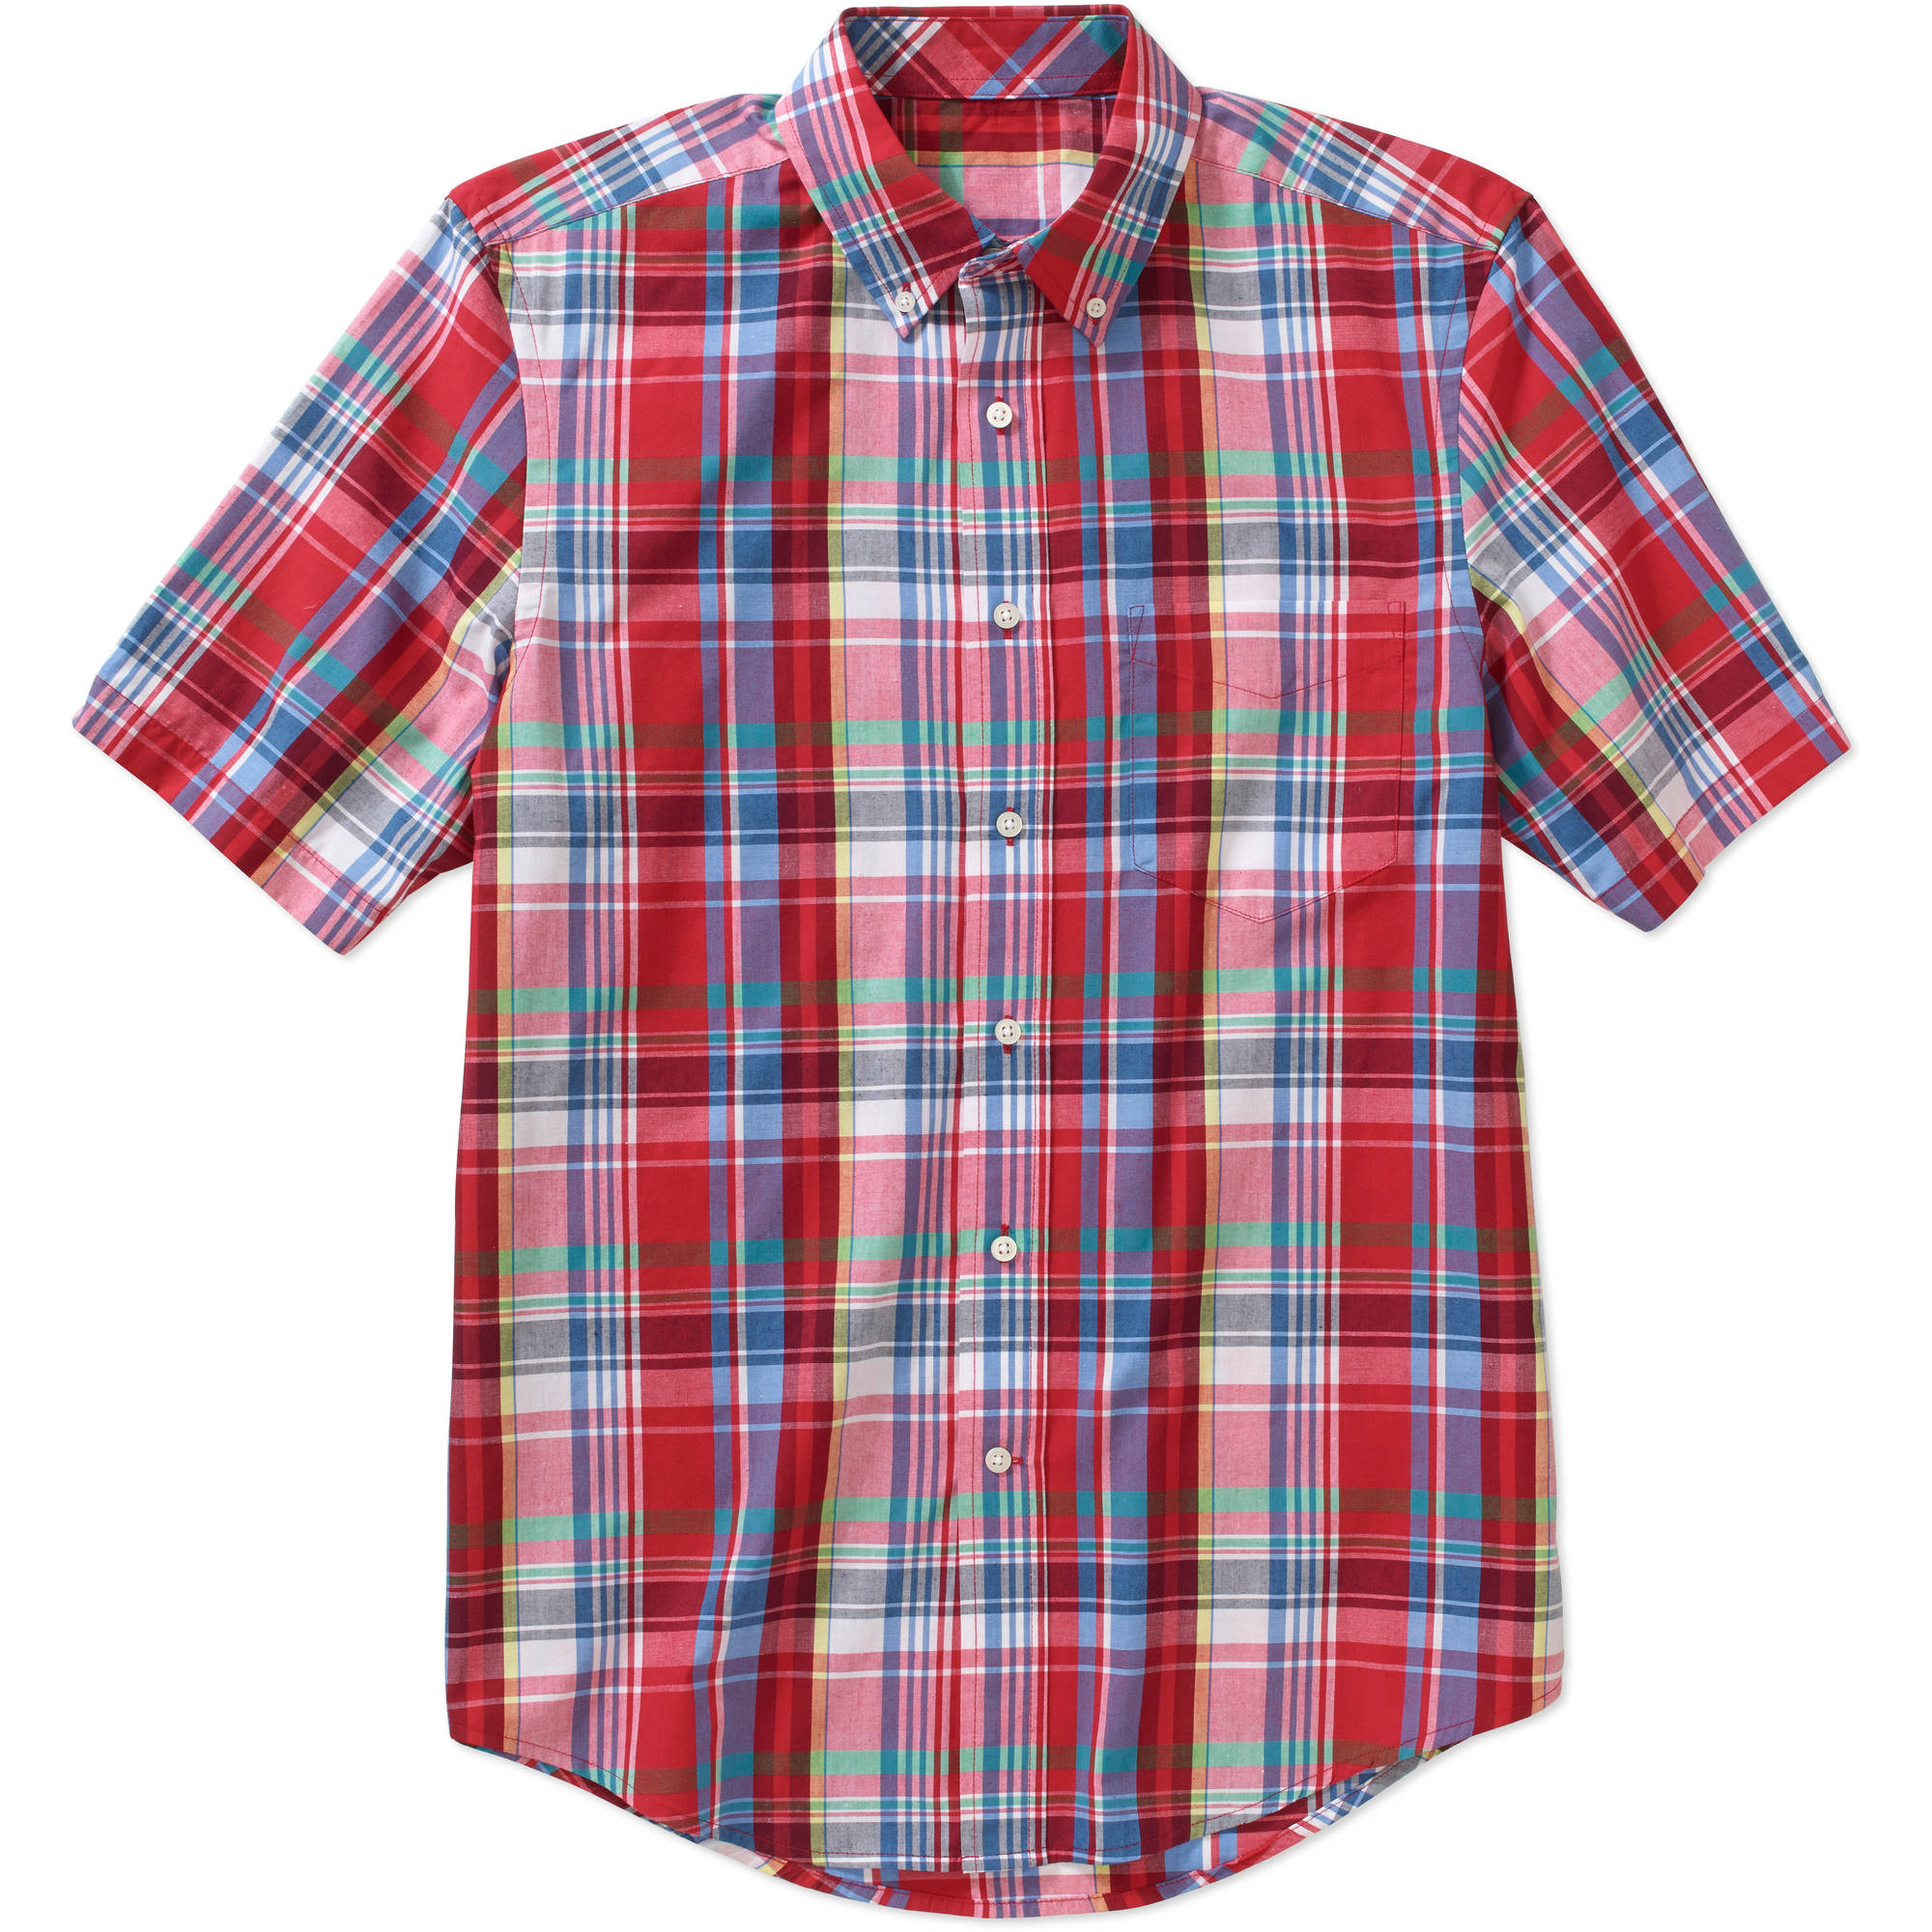 George Short Sleeve Plaid Woven - image 1 of 1